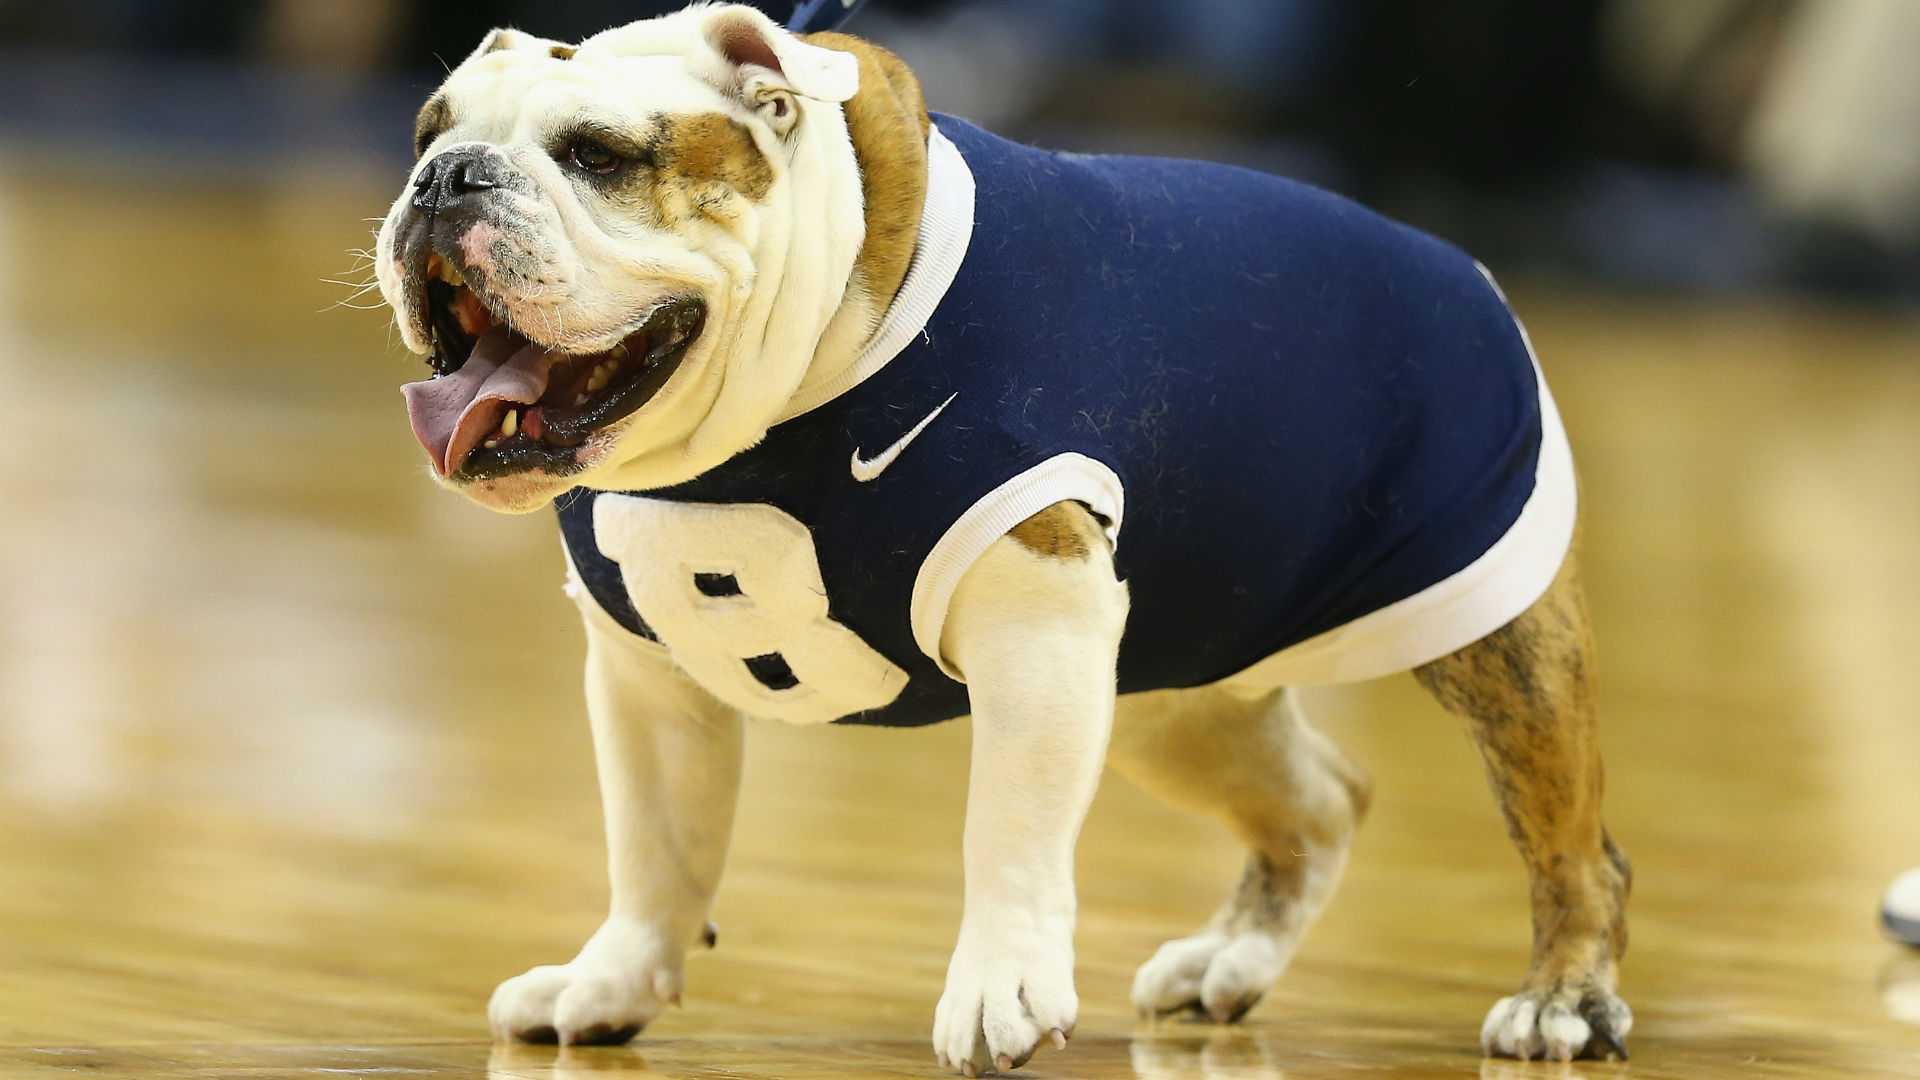 Butler Blue III denied access to PNC Arena, enraging humans and canines ...